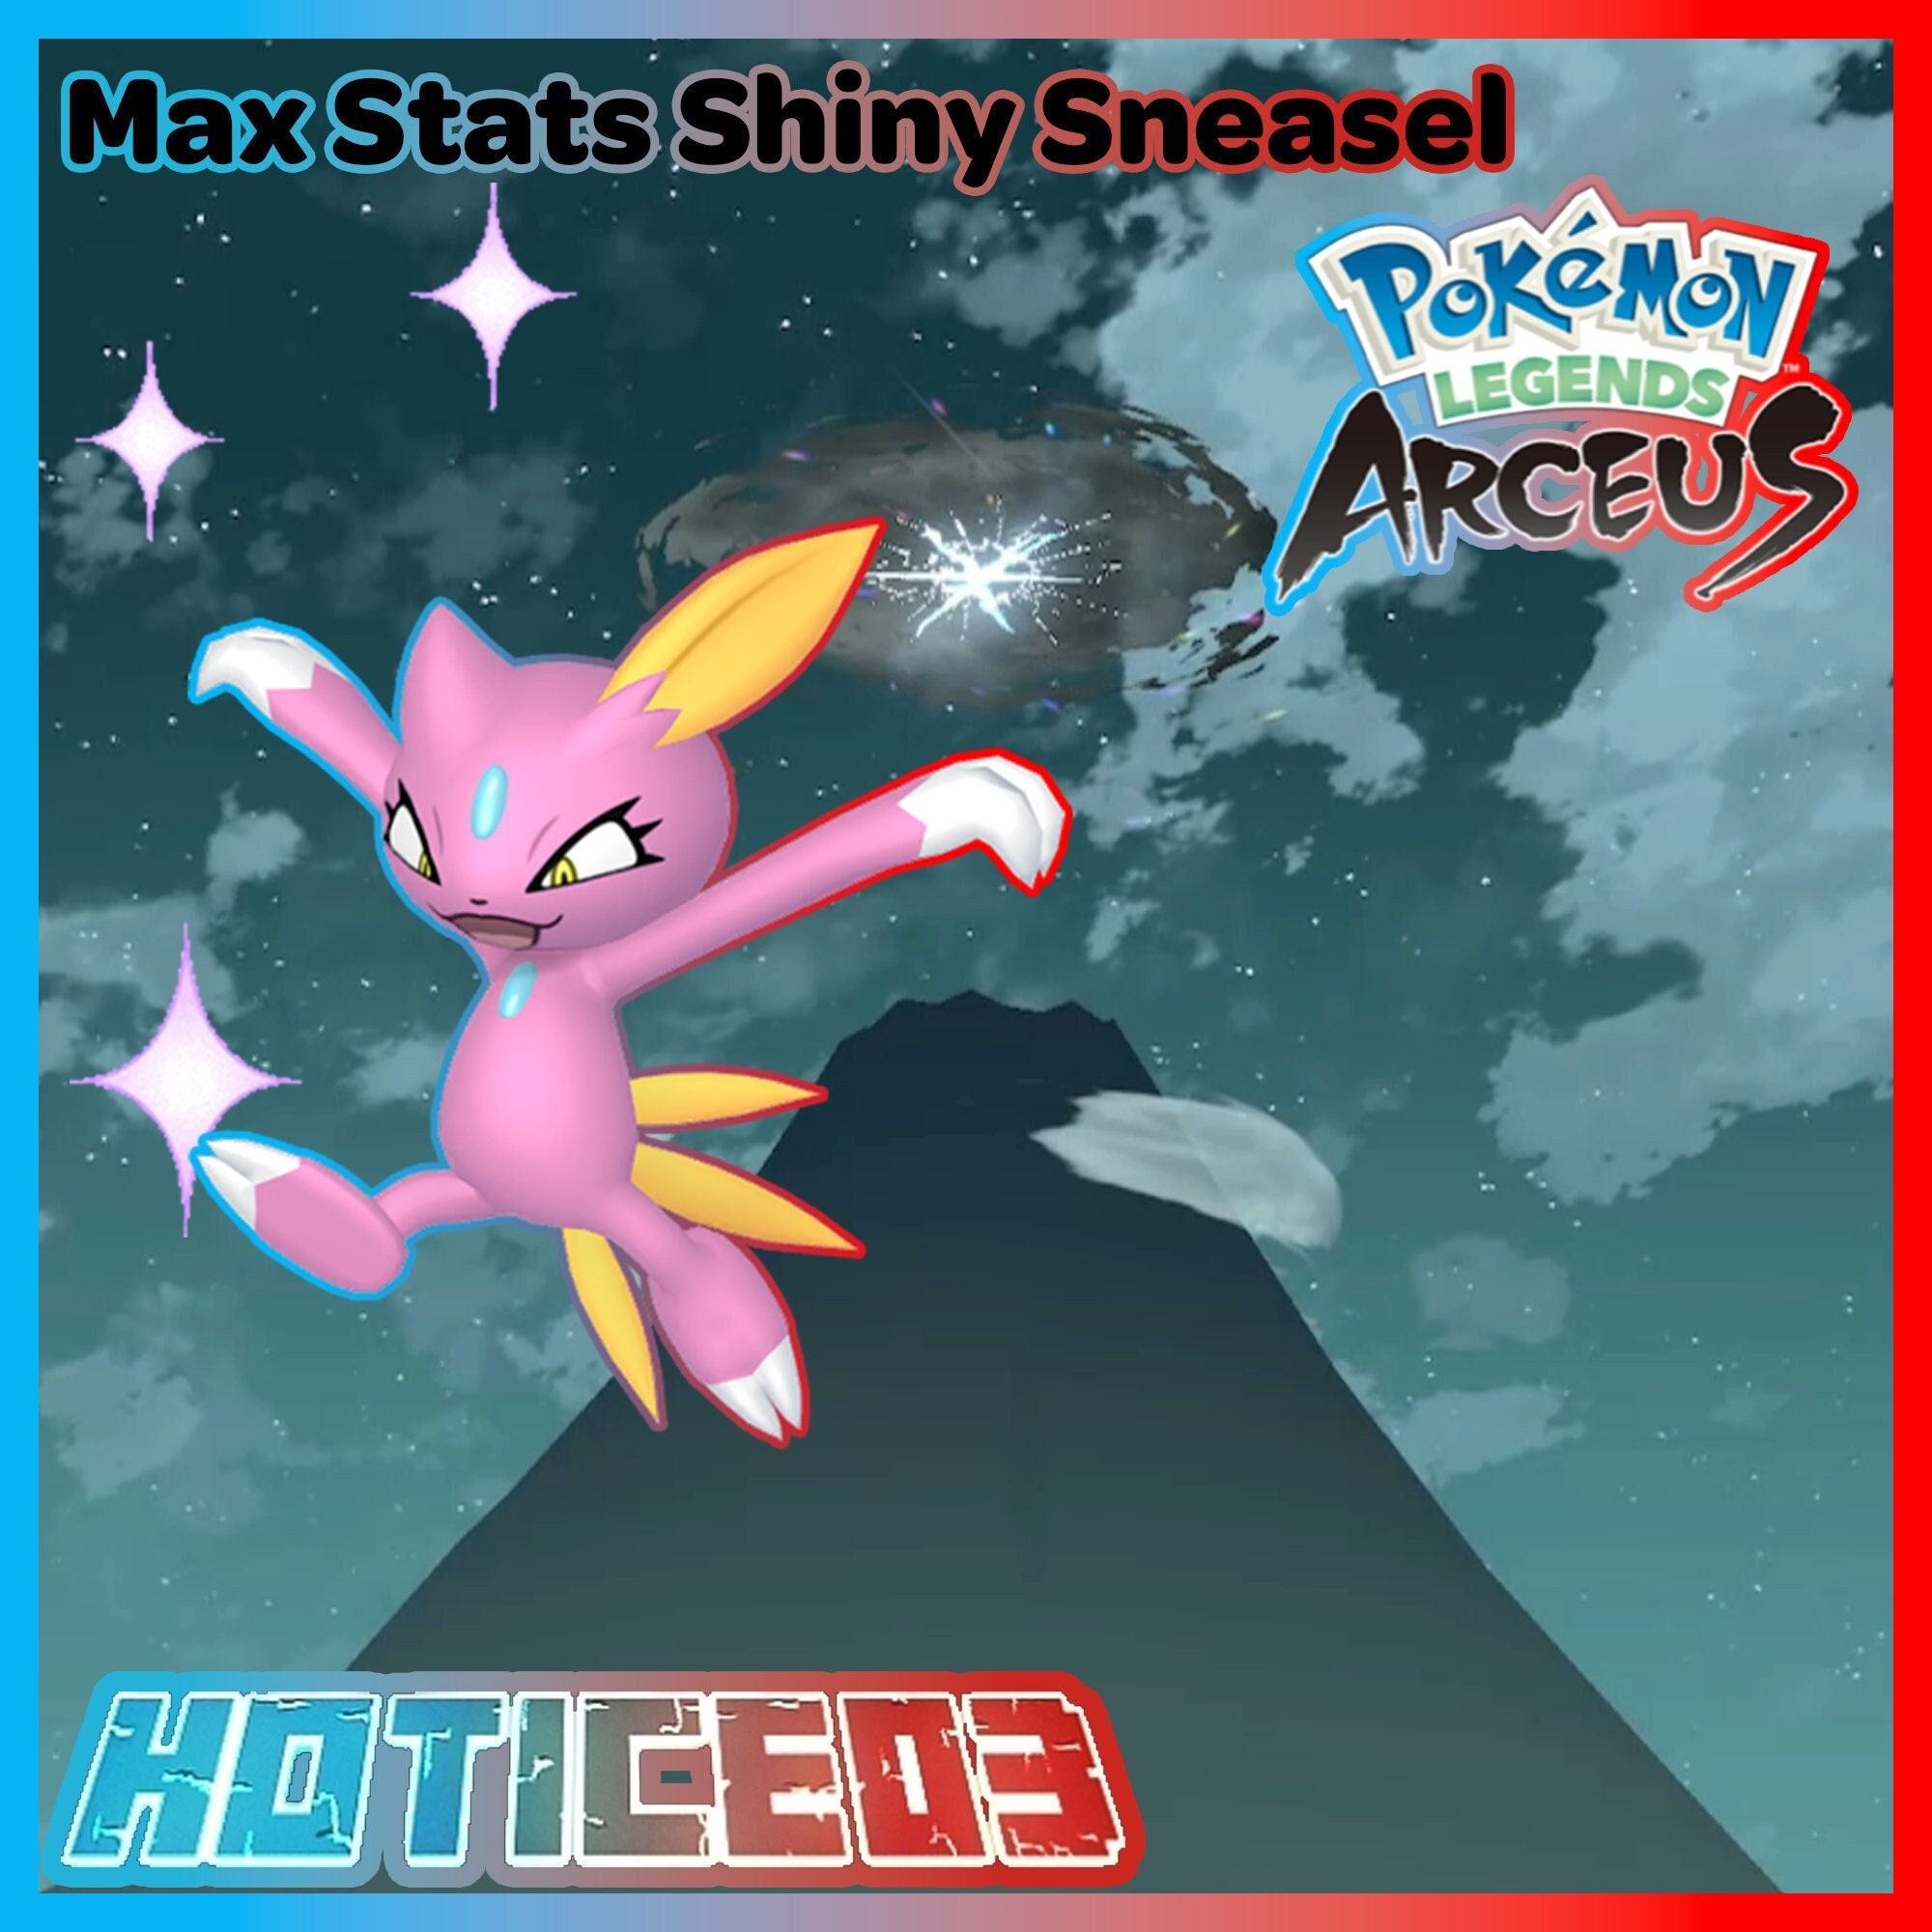 Ultra Square Shiny Spiritomb - 6IV + Max Stats Efforts and All Moves for  Pokemon Sword, Shield, Brilliant Diamond, Shining Pearl, Legends Arceus,  Scarlet, and Violet - elymbmx